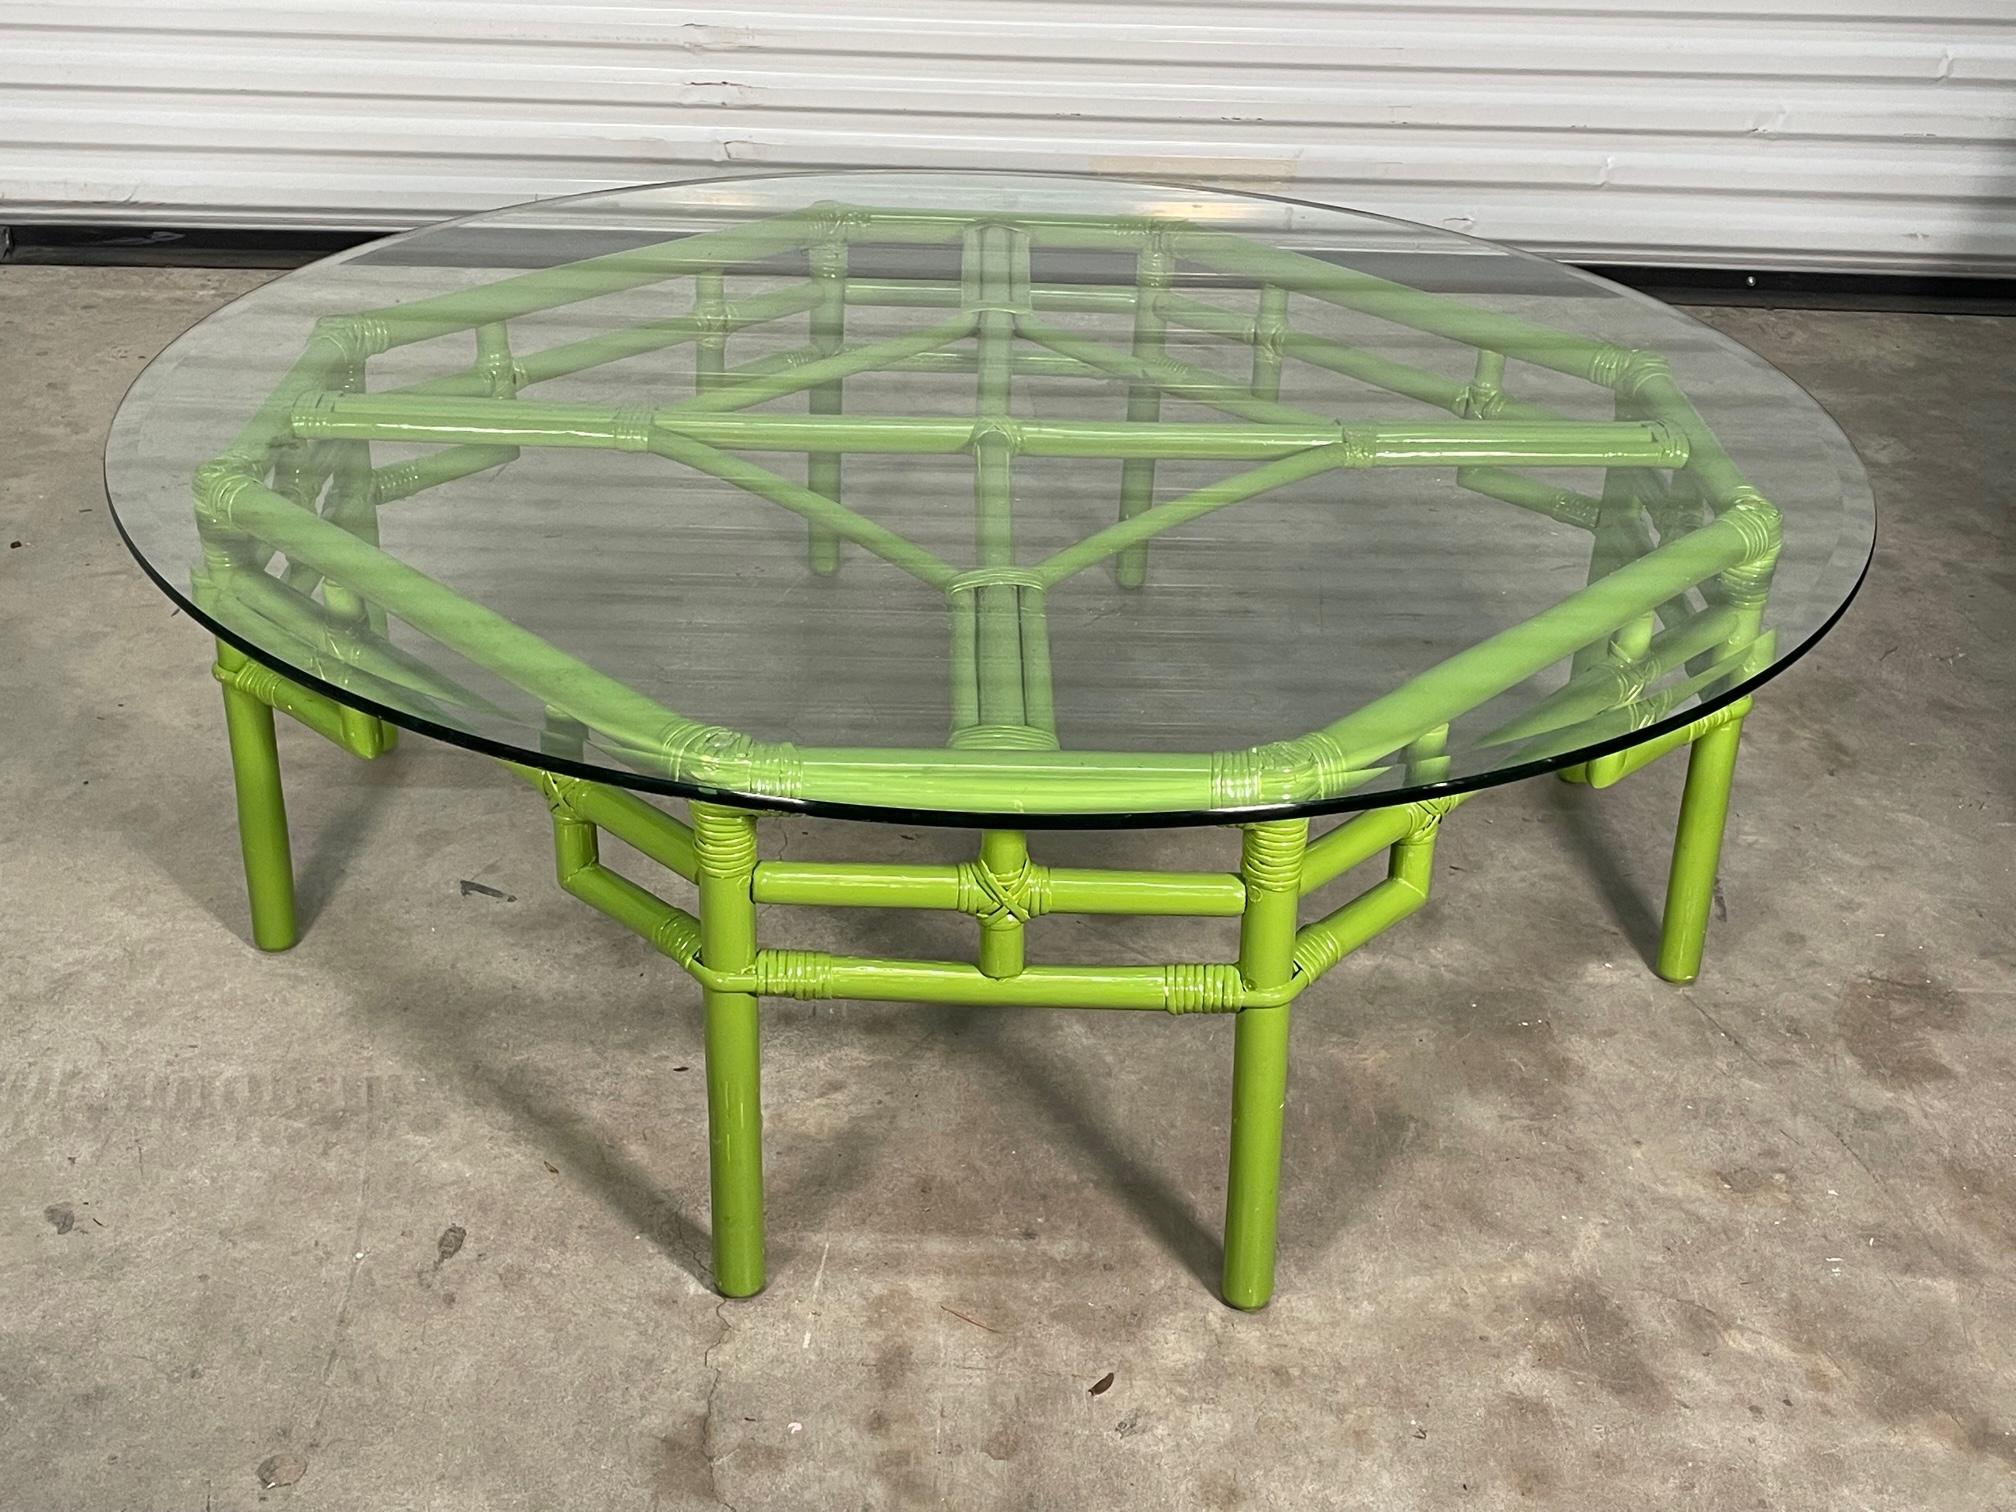 Vintage rattan coffee/cocktail table features a high gloss green finish and a 1/2